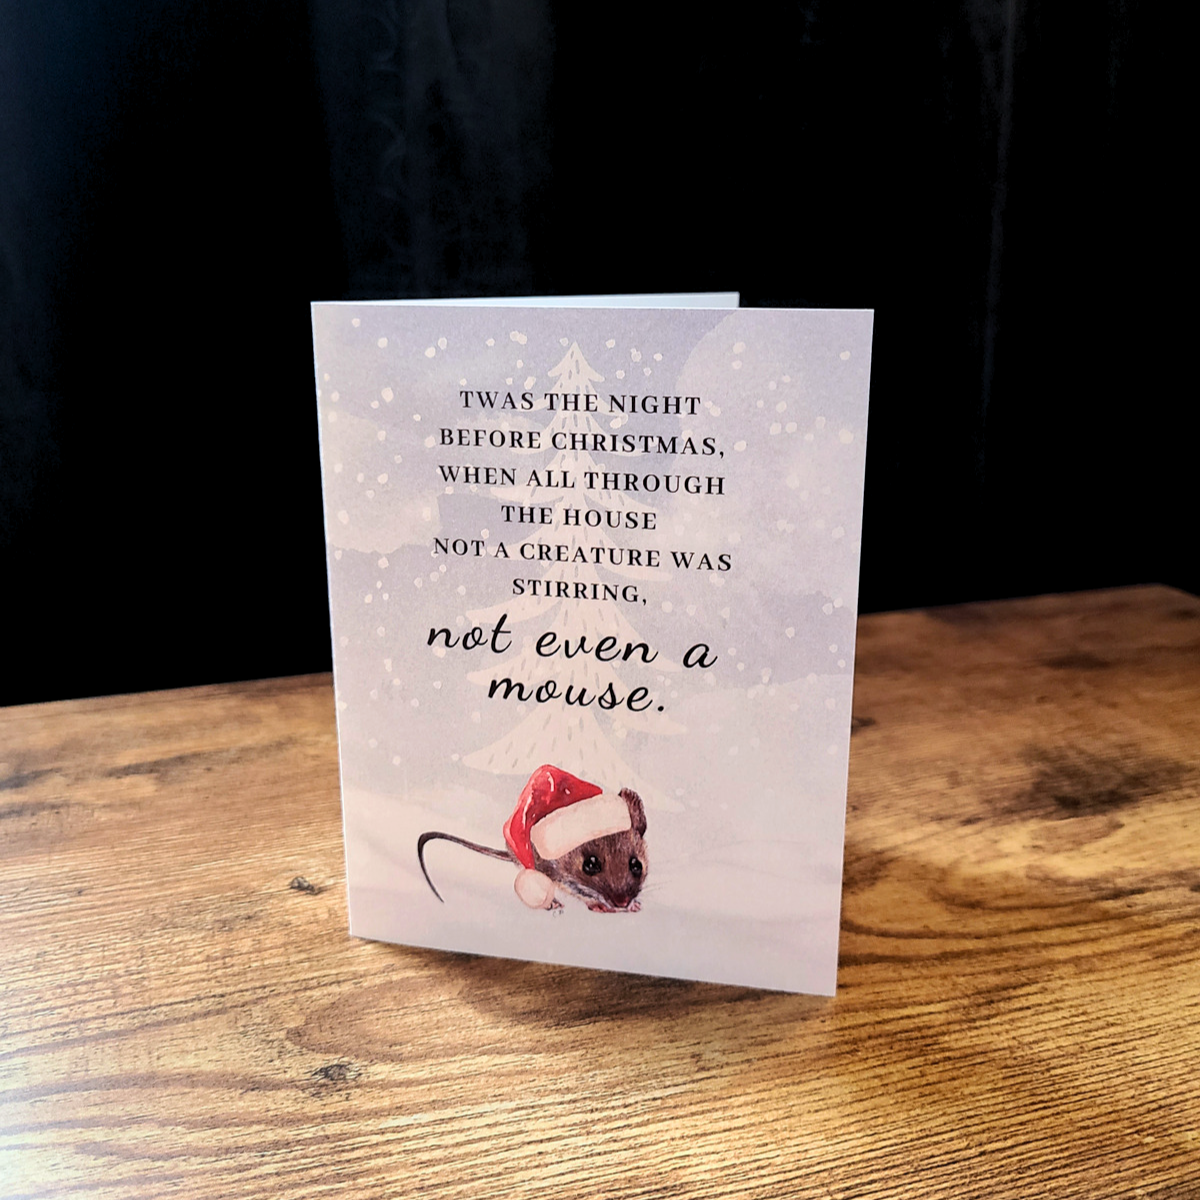 Mouse Christmas card, Twas the night before Christmas, Not a creature was stirring, Santa mouse card, Cute mouse holiday card, Festive mouse